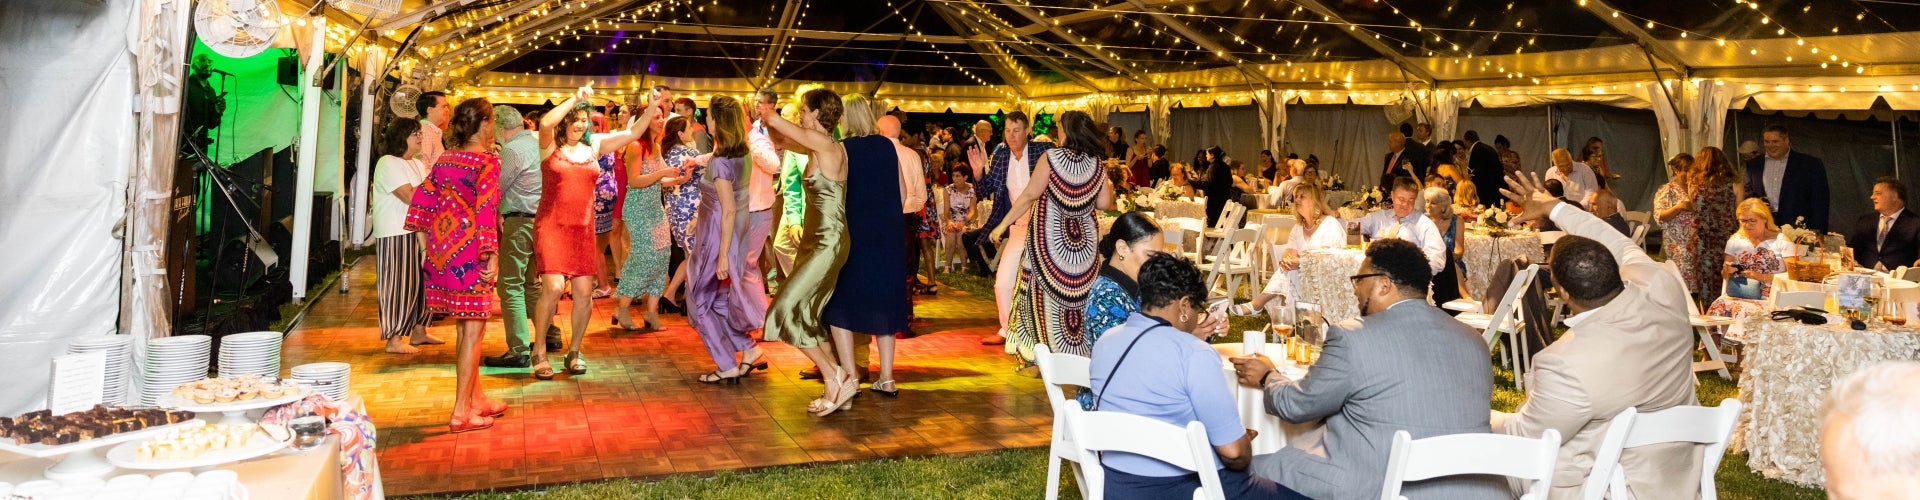 People dancing under a clear-top tent 